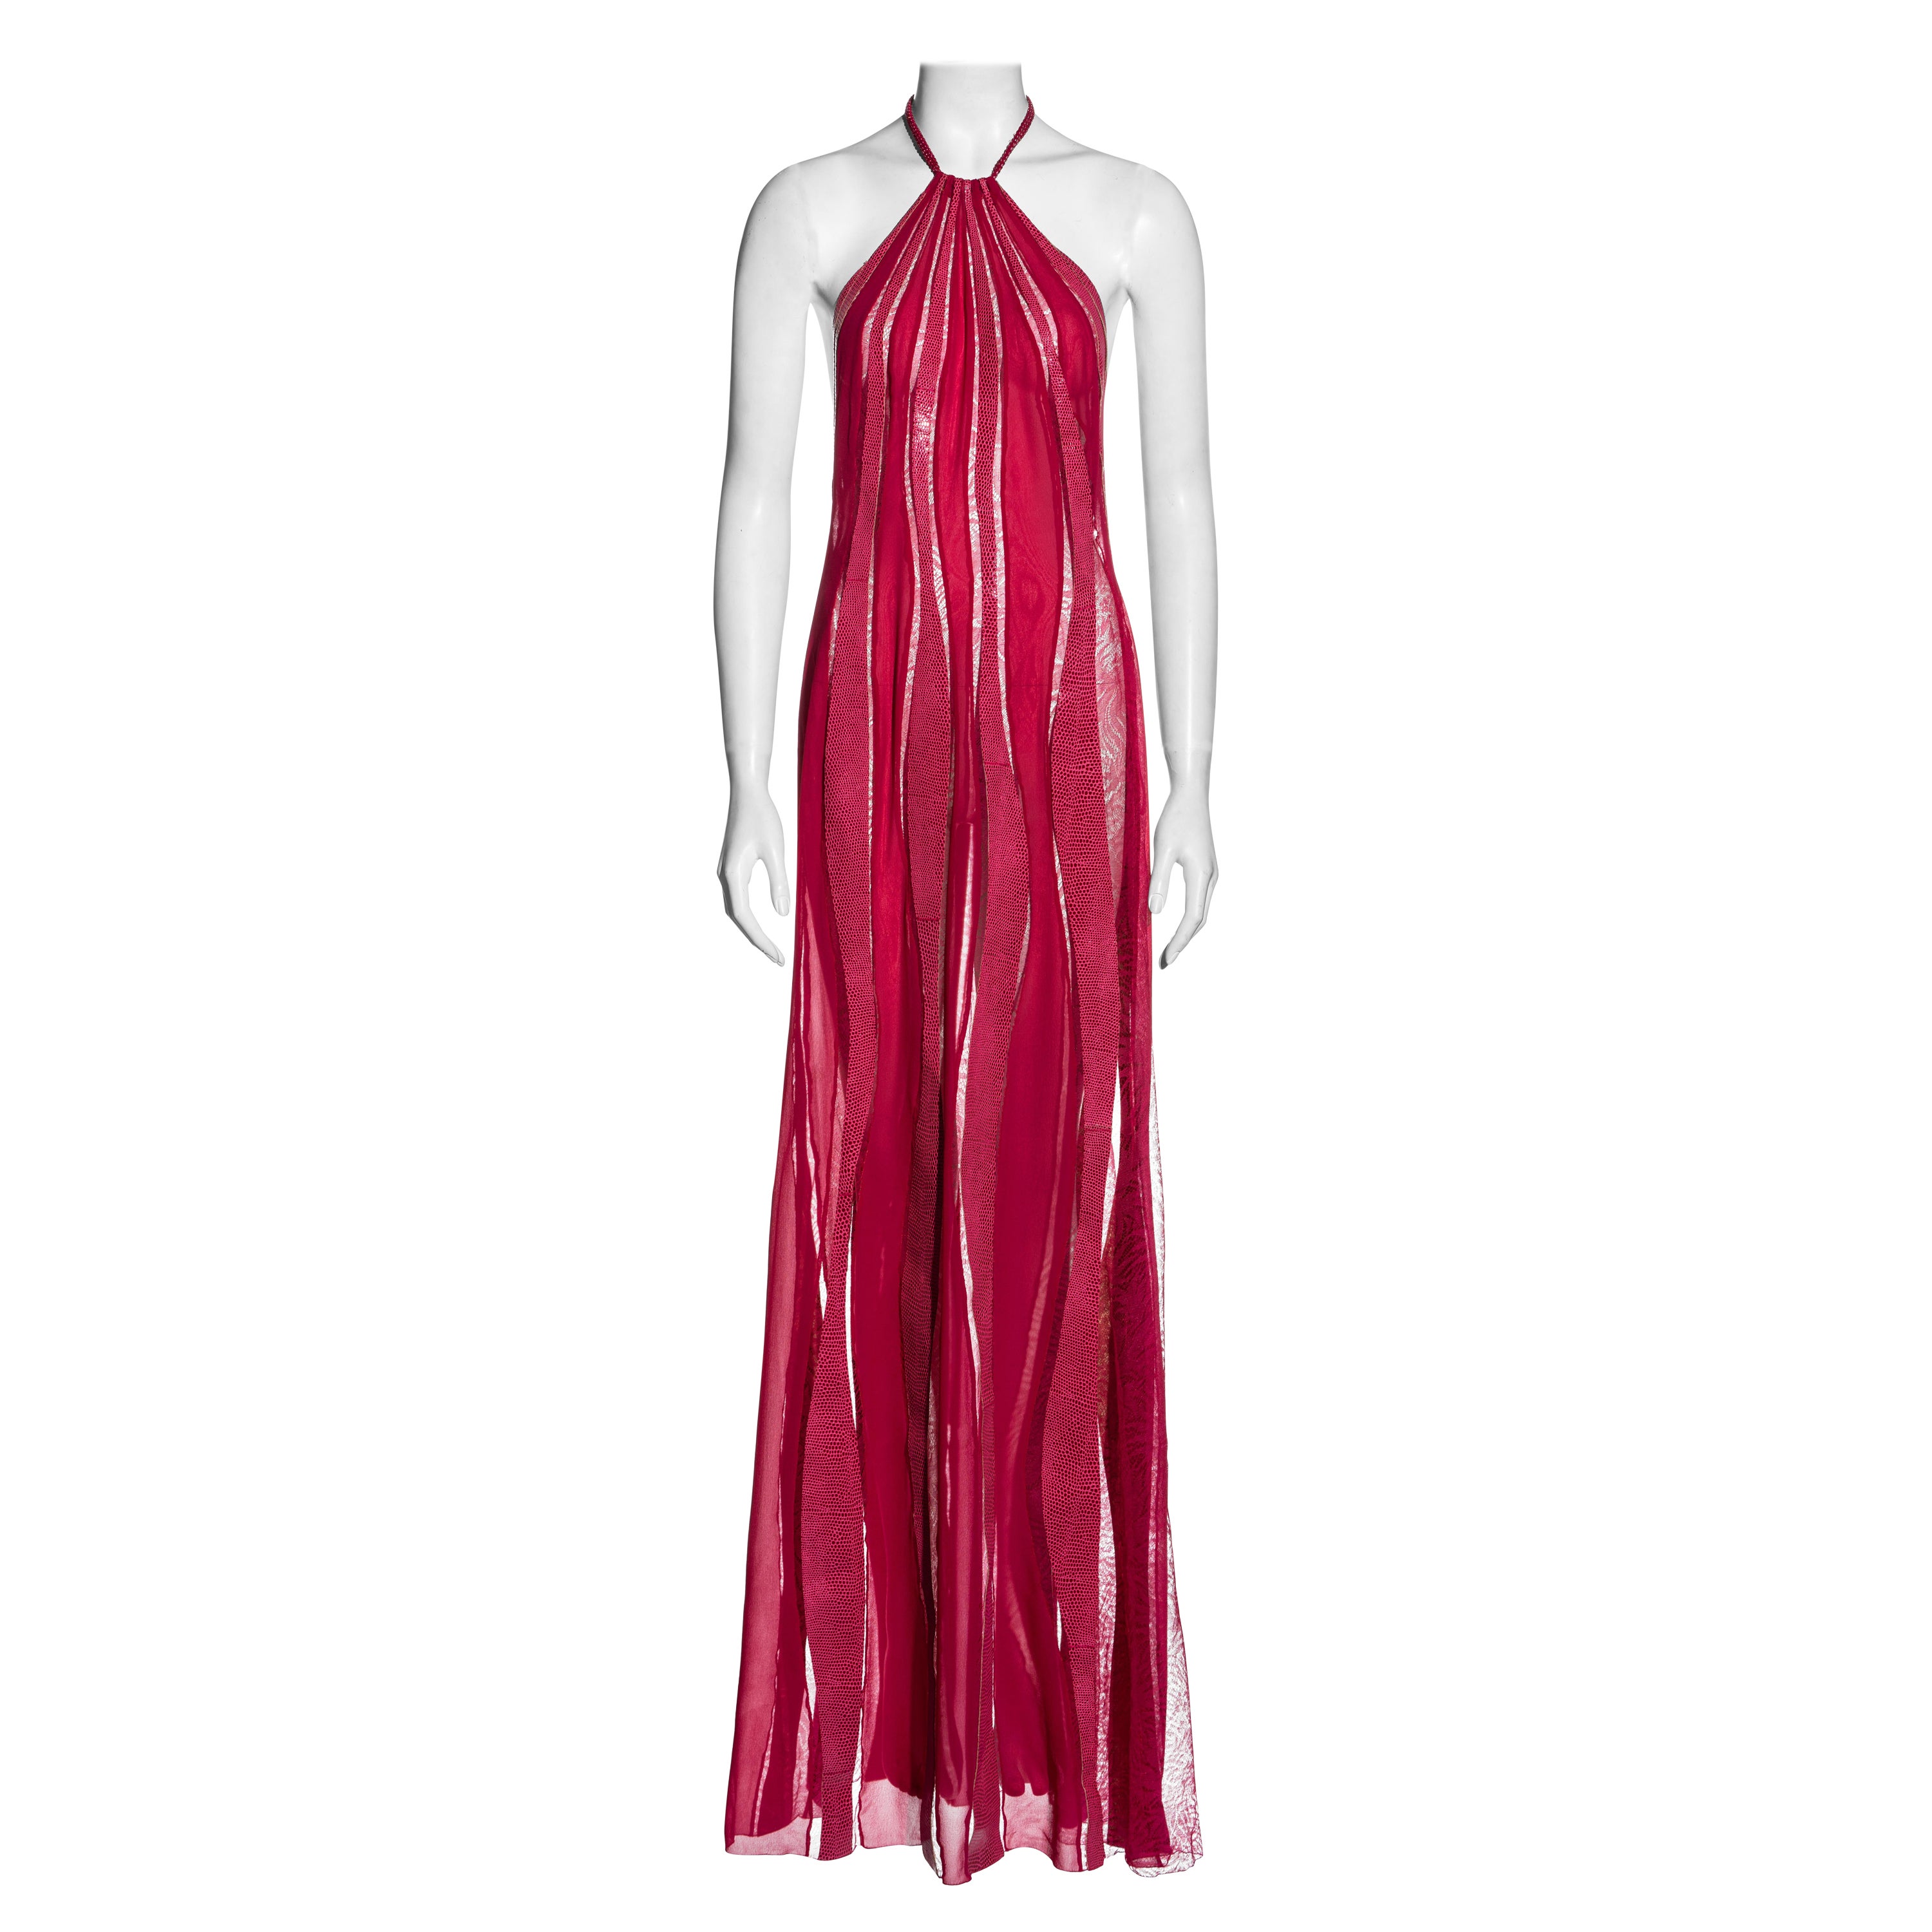 Gianni Versace pink silk, leather and lace halter neck maxi dress, fw 2000